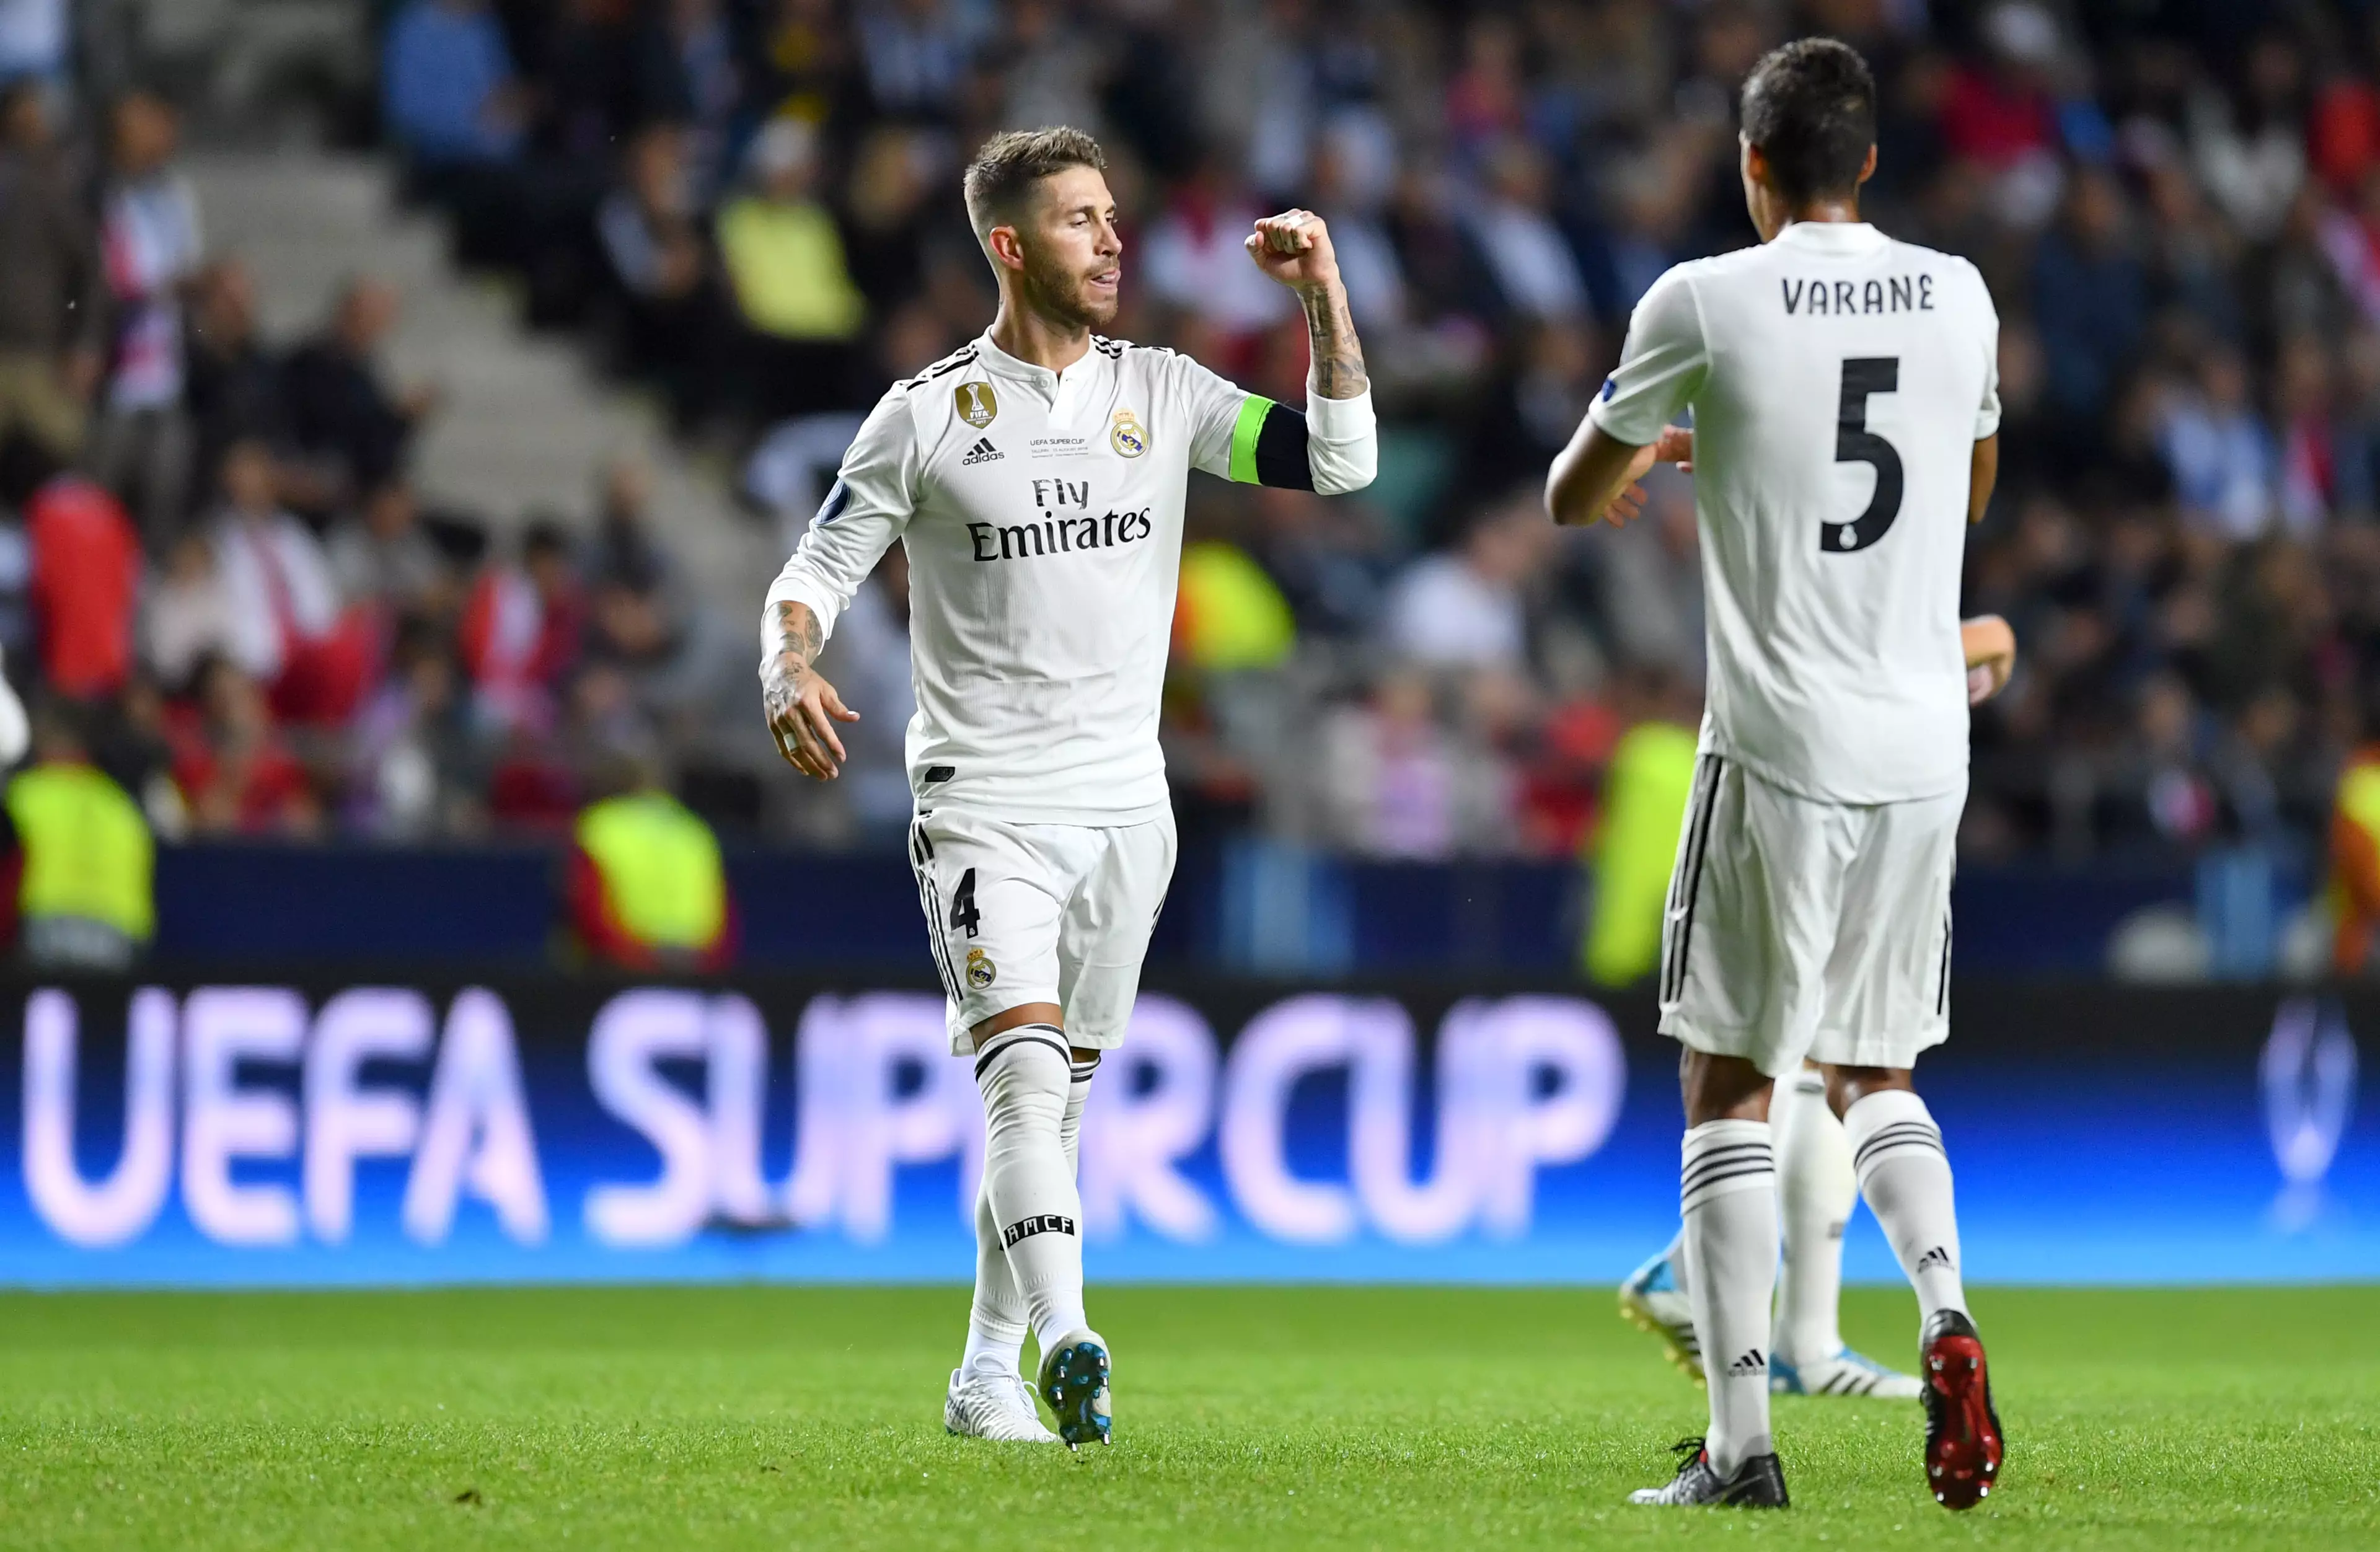 Varane and Ramos built a brilliant partnership over the past decade. Image: PA Images